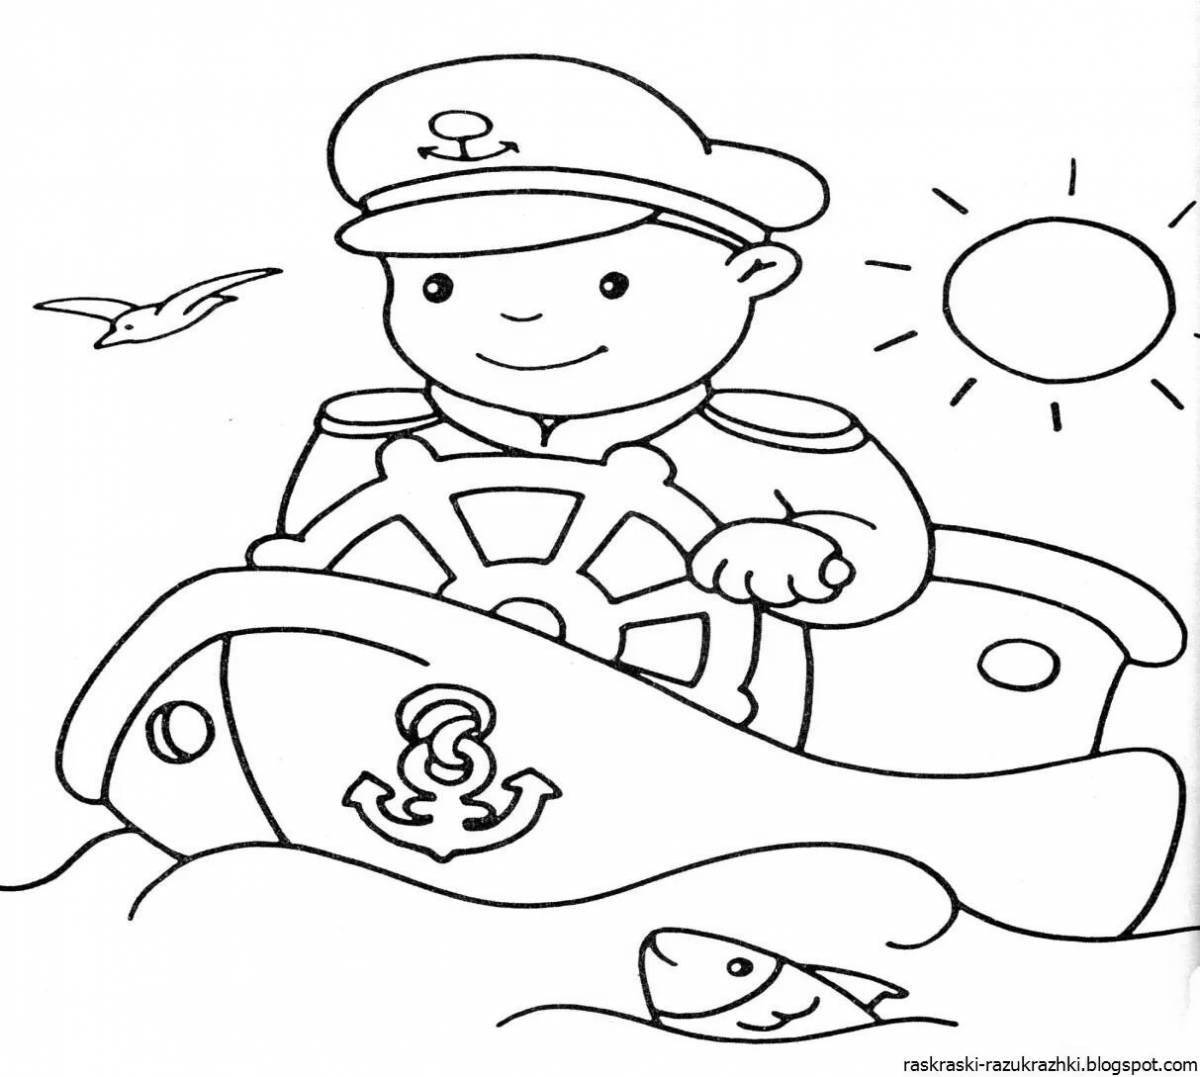 Bright military profession coloring page